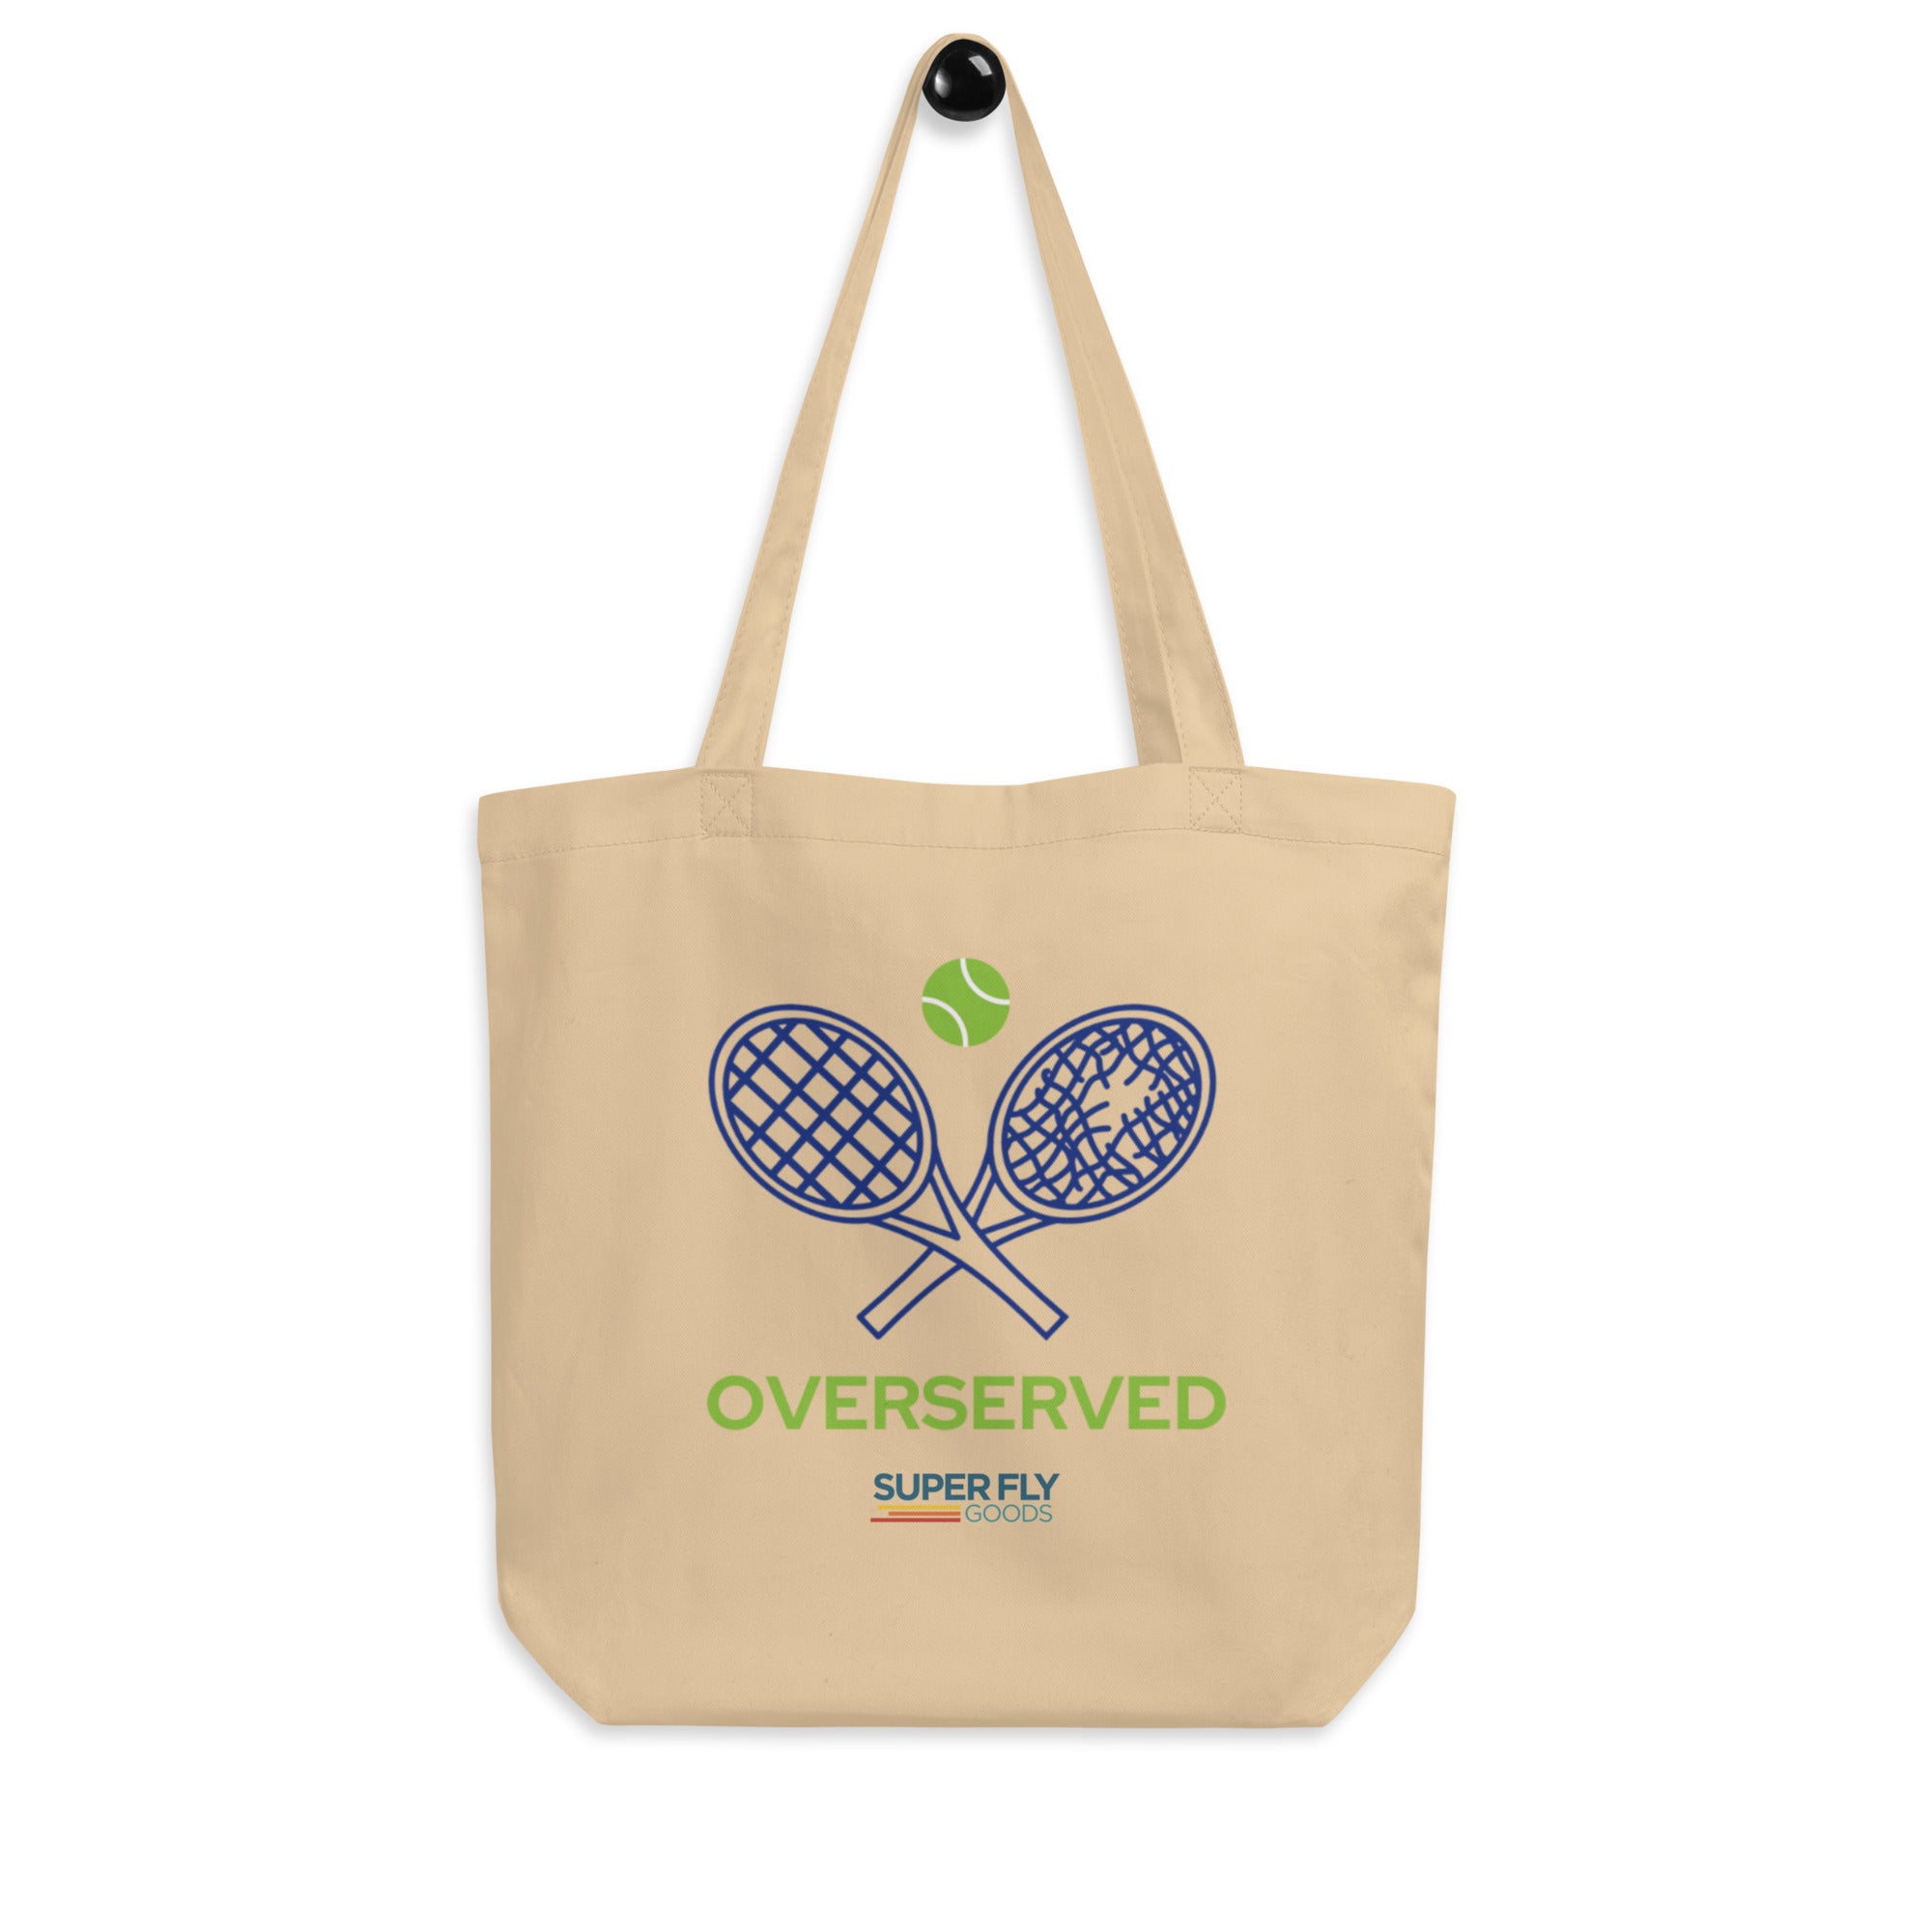 Over Served Tennis Tote Bag